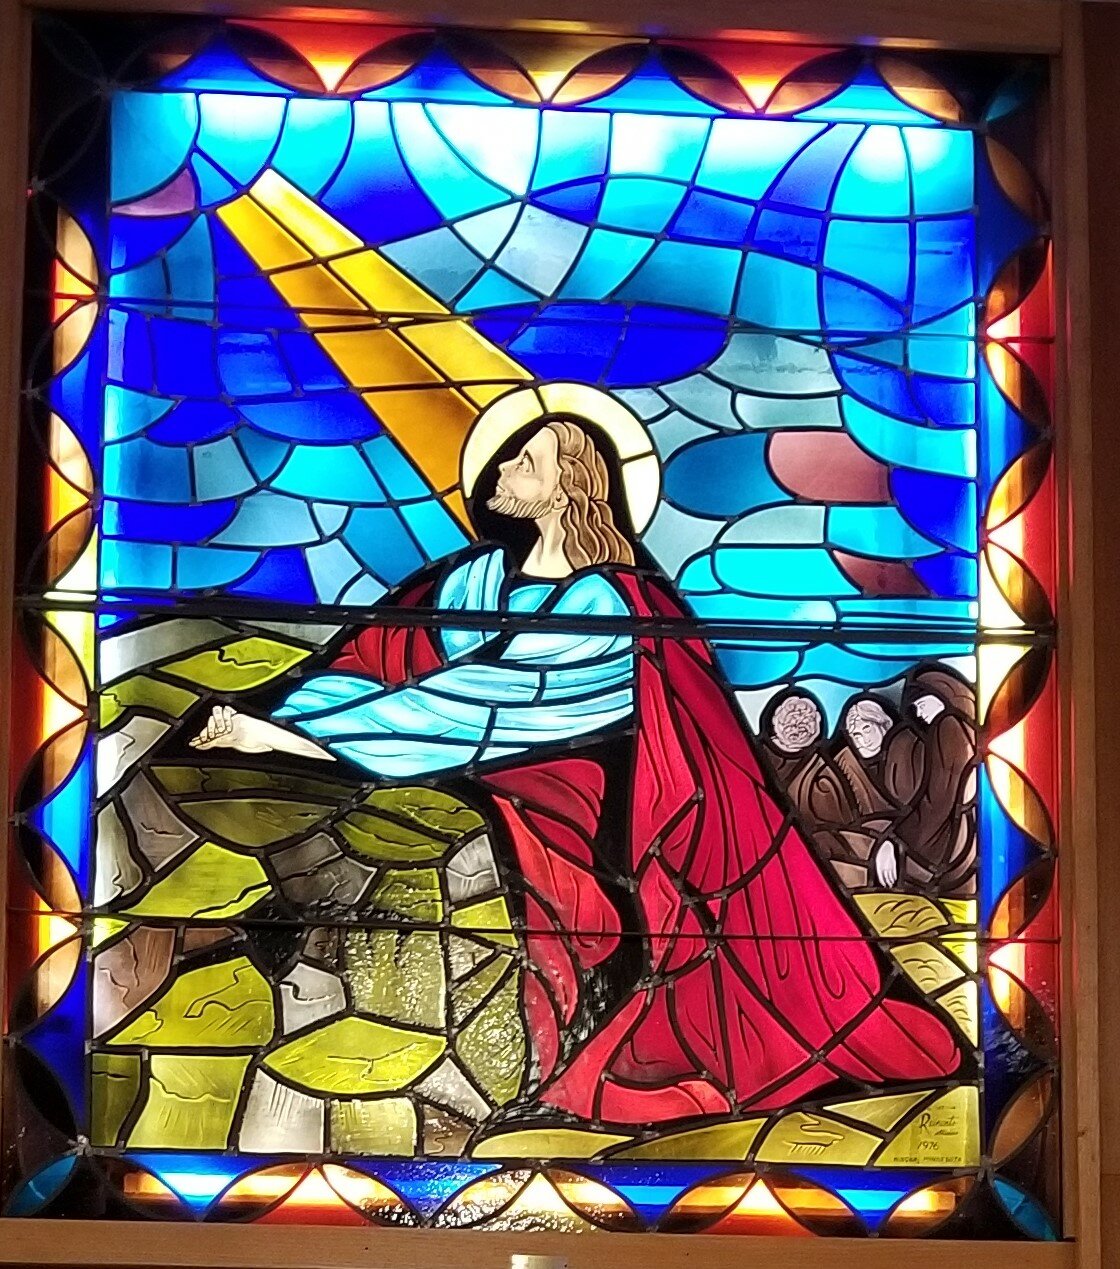 The backlit stained glass rendering of Jesus in Gethsemane will be removed from the current church building and placed behind the alter on this raised platform in the main body of the church's new building.  All of the stained glass windows will also be relocated to the new church.